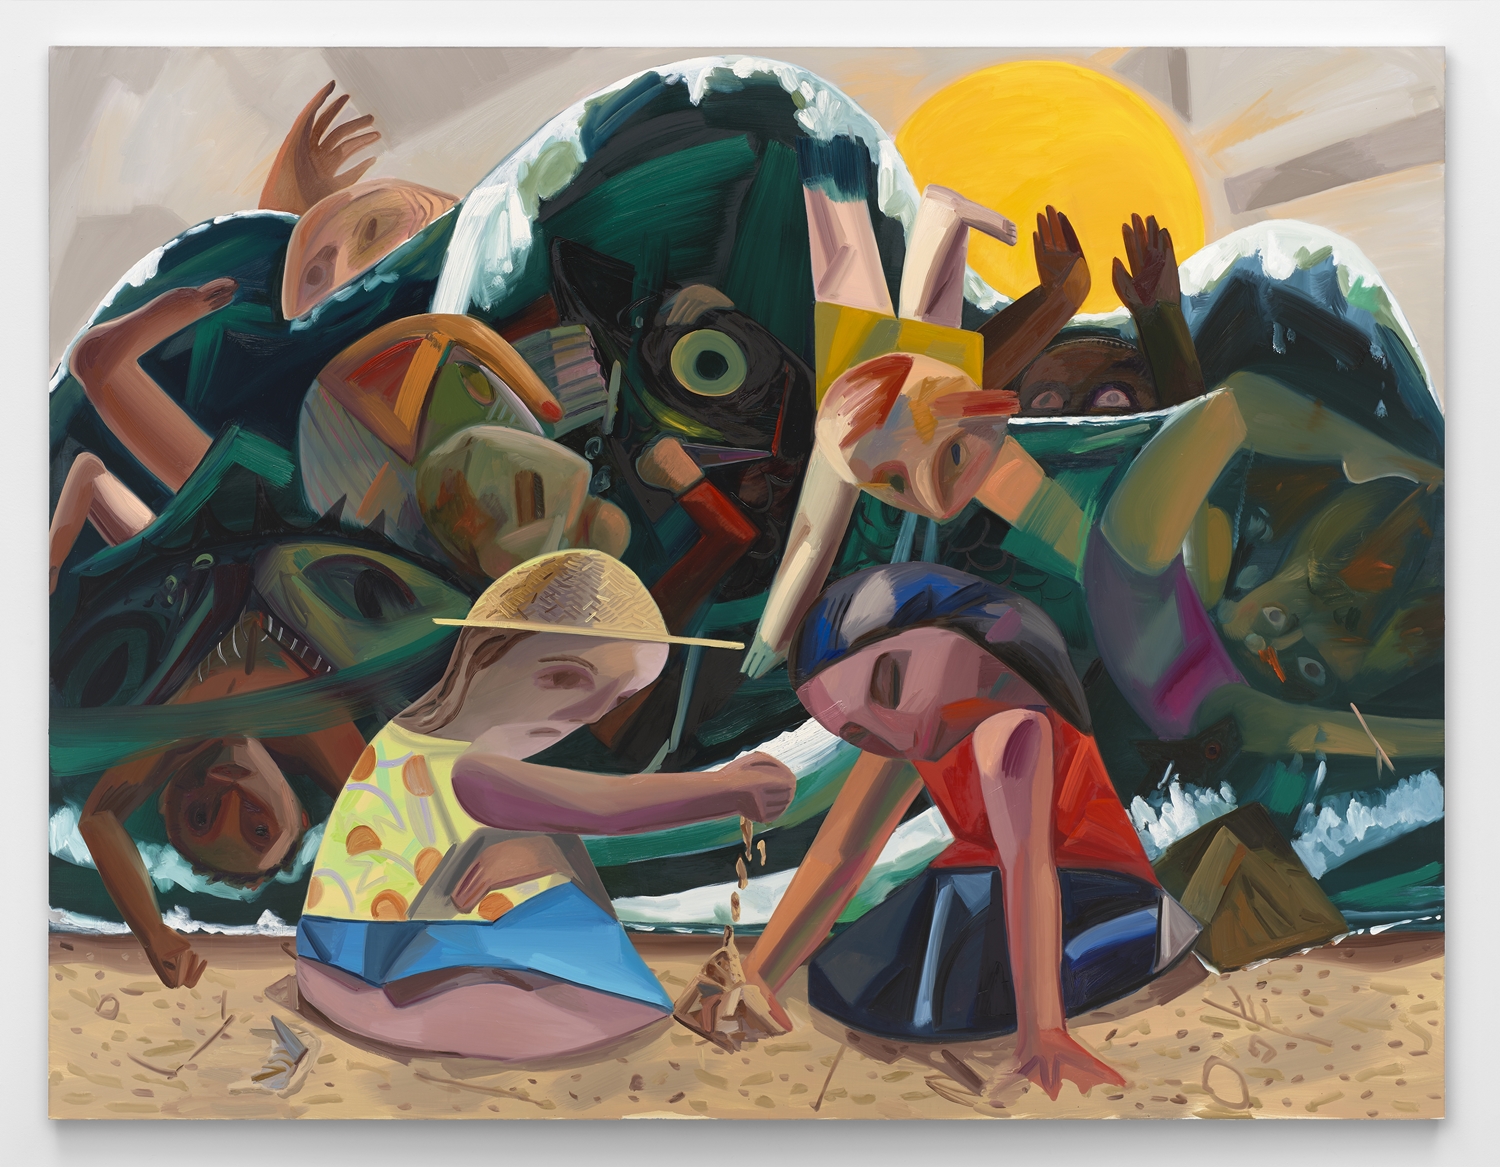 See the Chaotic Paintings in Dana Schutz’s Polarizing ICA Boston Show